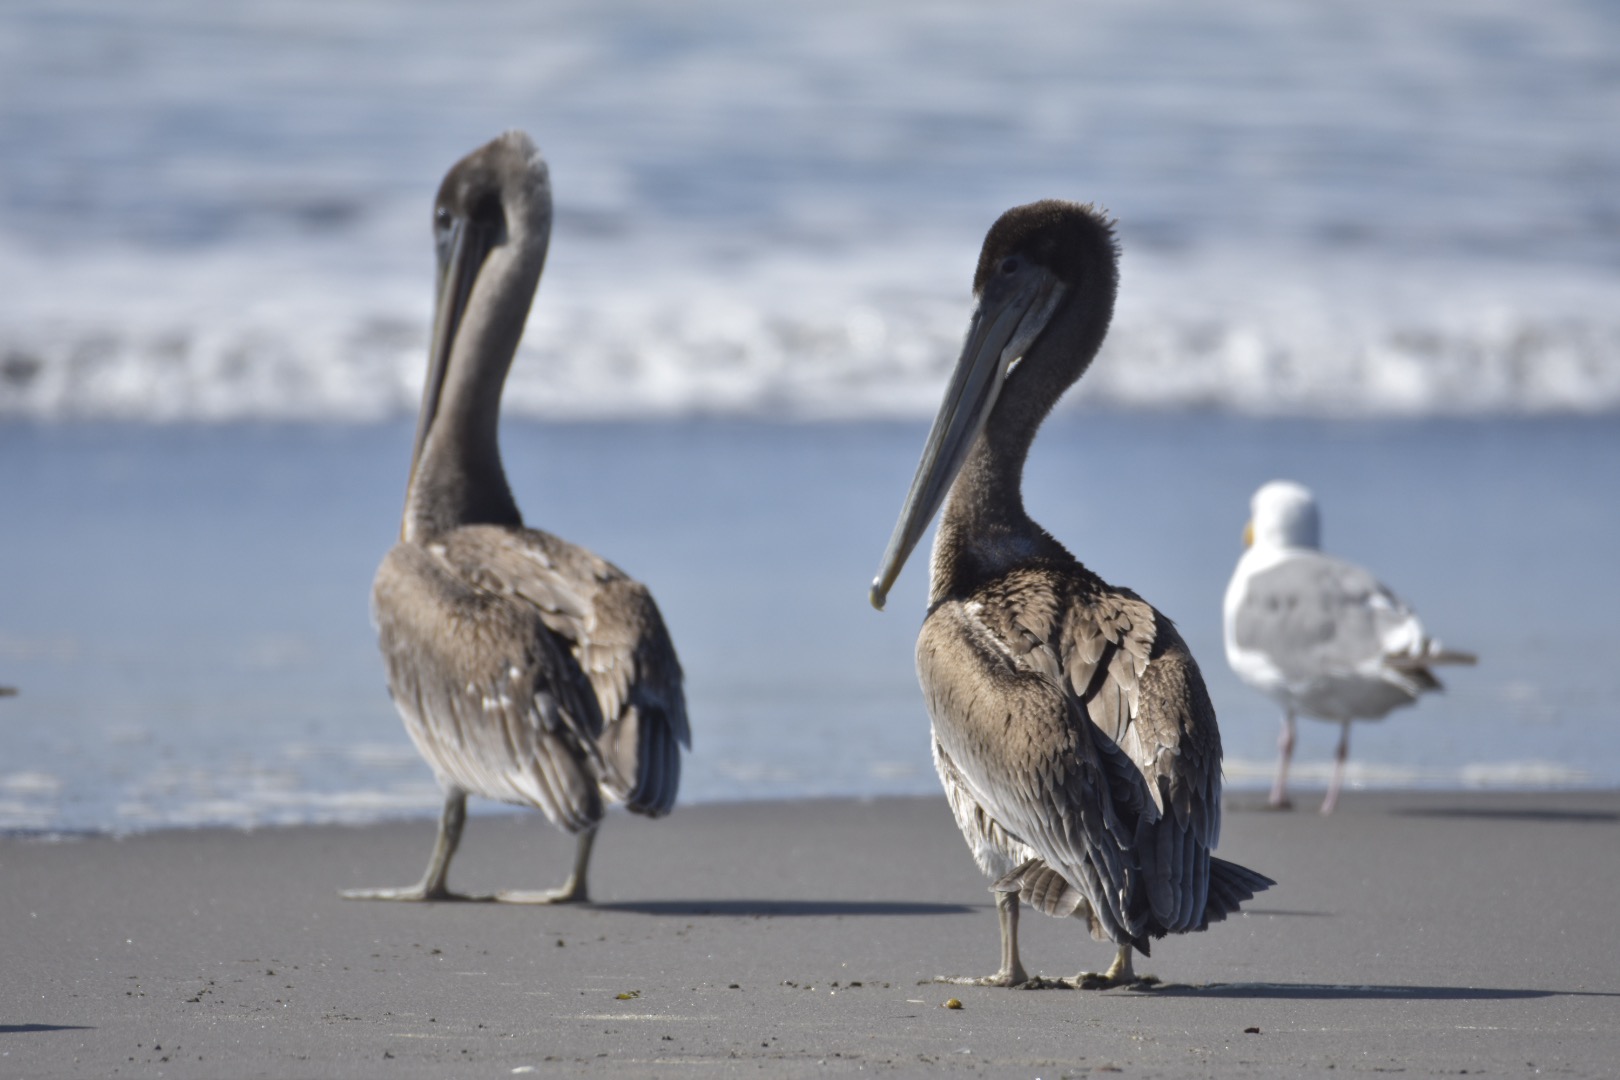 ocean blue project photo. pelicans on the beach with a seagull in the background